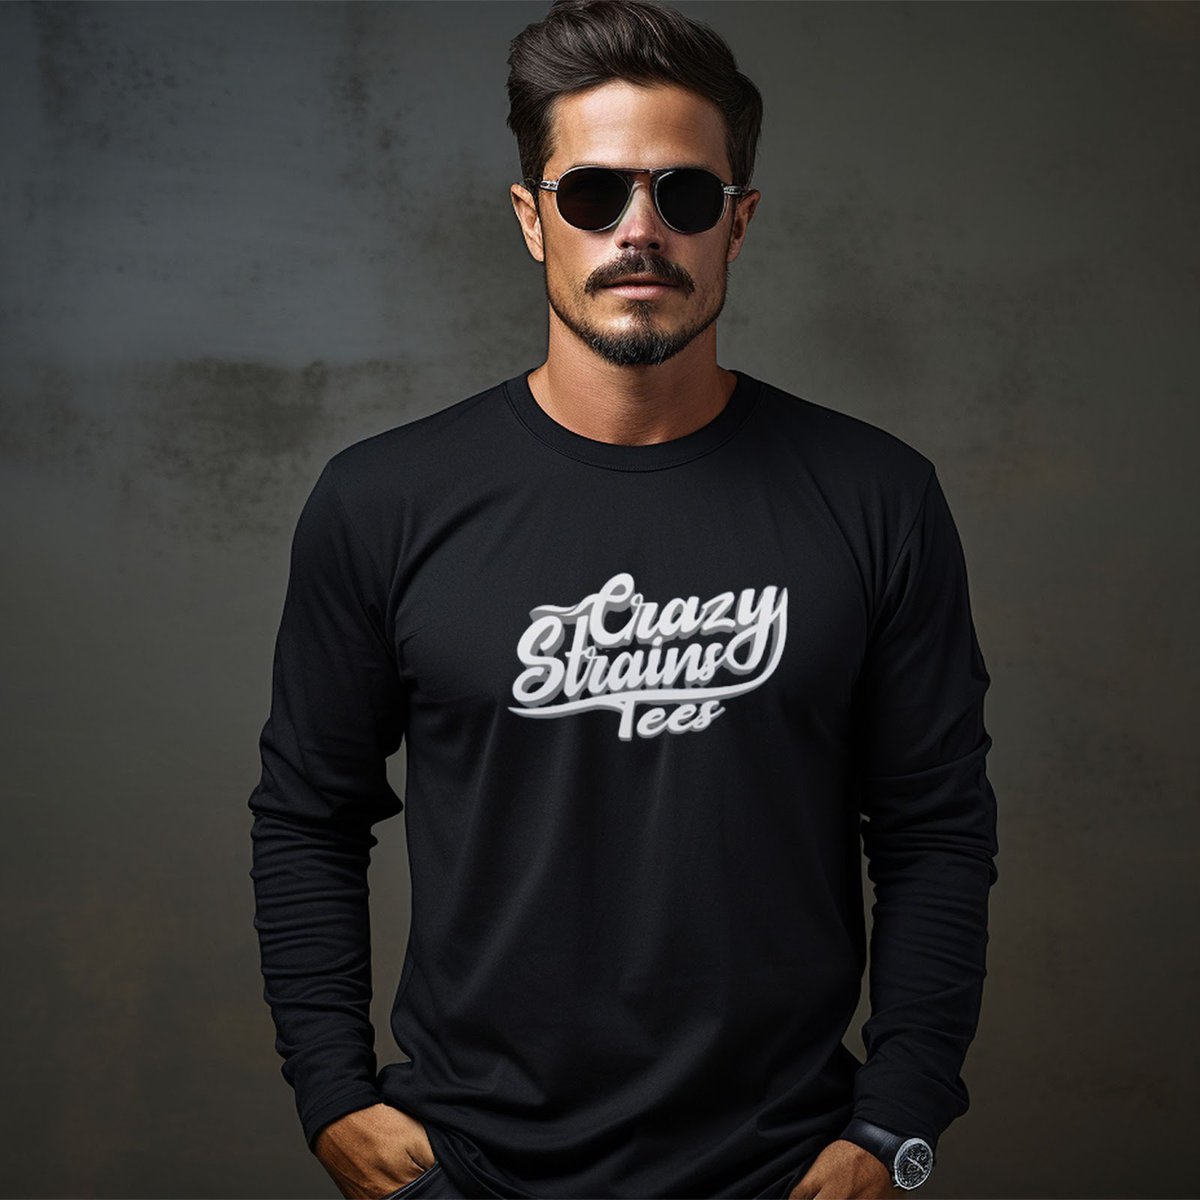 Made for cannabis enthusiasts who appreciate comfort and quality, this sweatshirt is perfect for lounging at home or layering up for outdoor adventures. Emblazoned with our iconic logo.
-----
Order yours now! crazystrainstees.com/products/unise…
.
#wardrobeessentials #casualwear